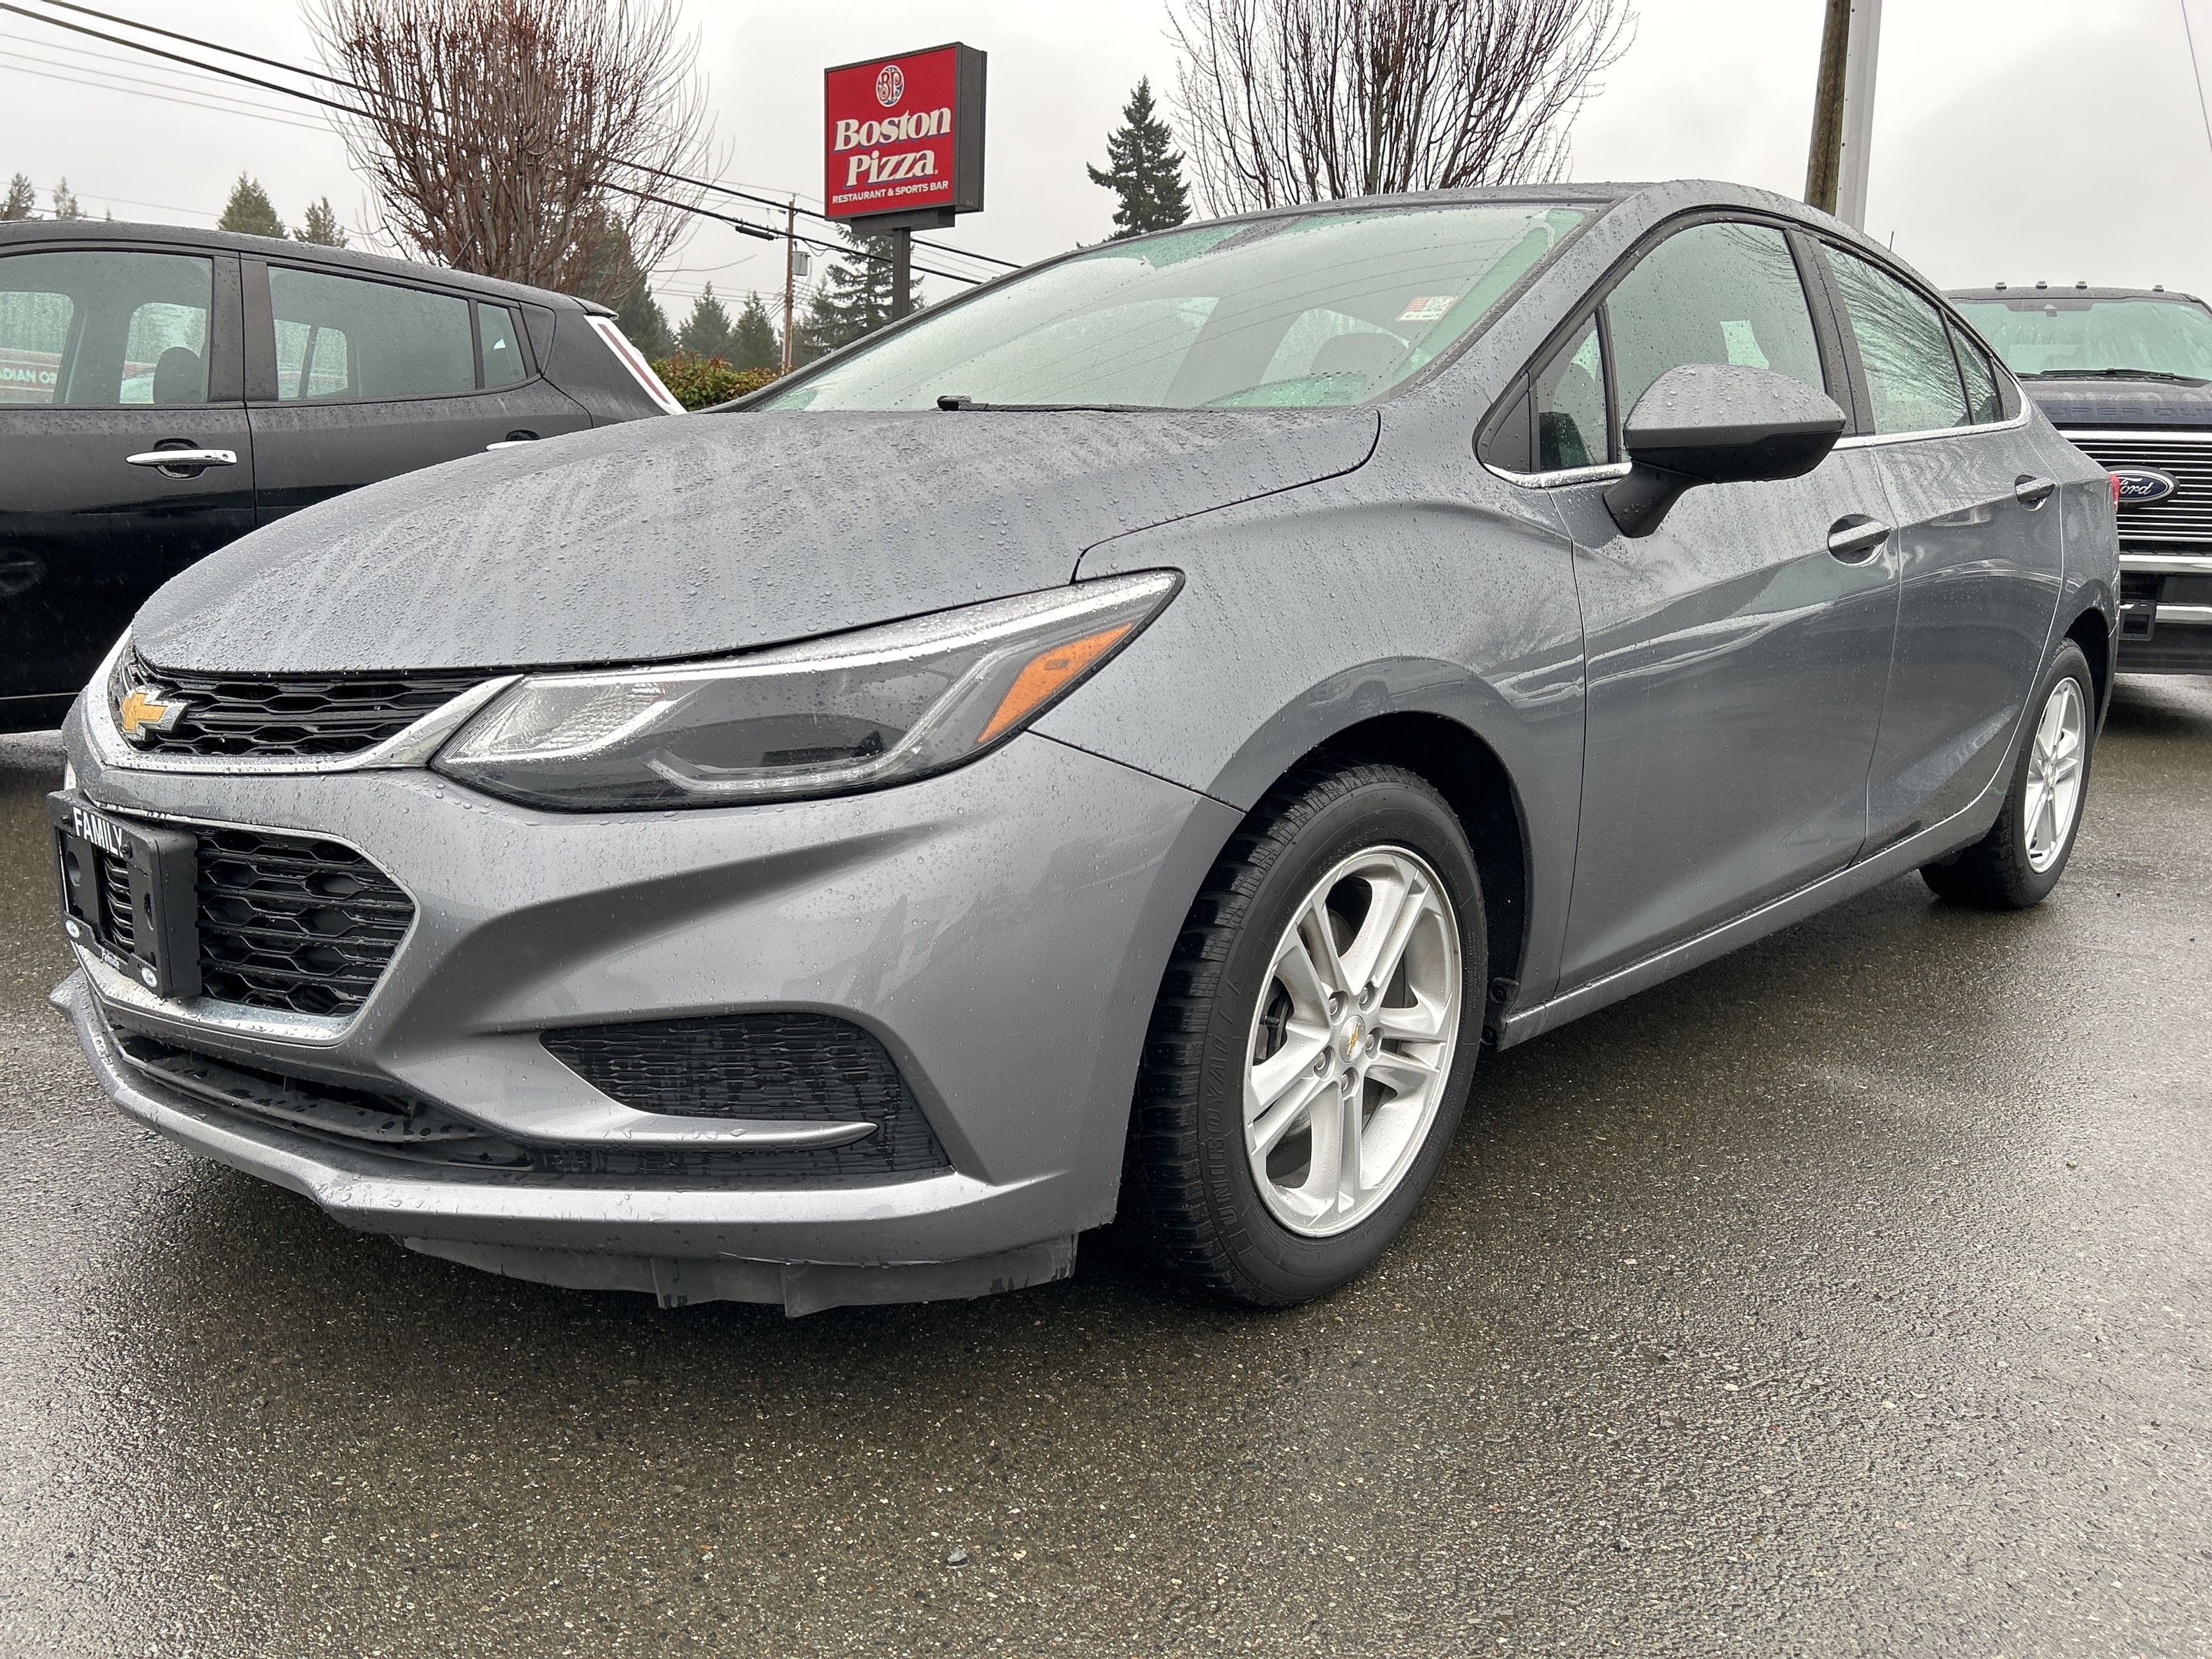 2018 Chevrolet Cruze Clean Car second set tires finance available OAC